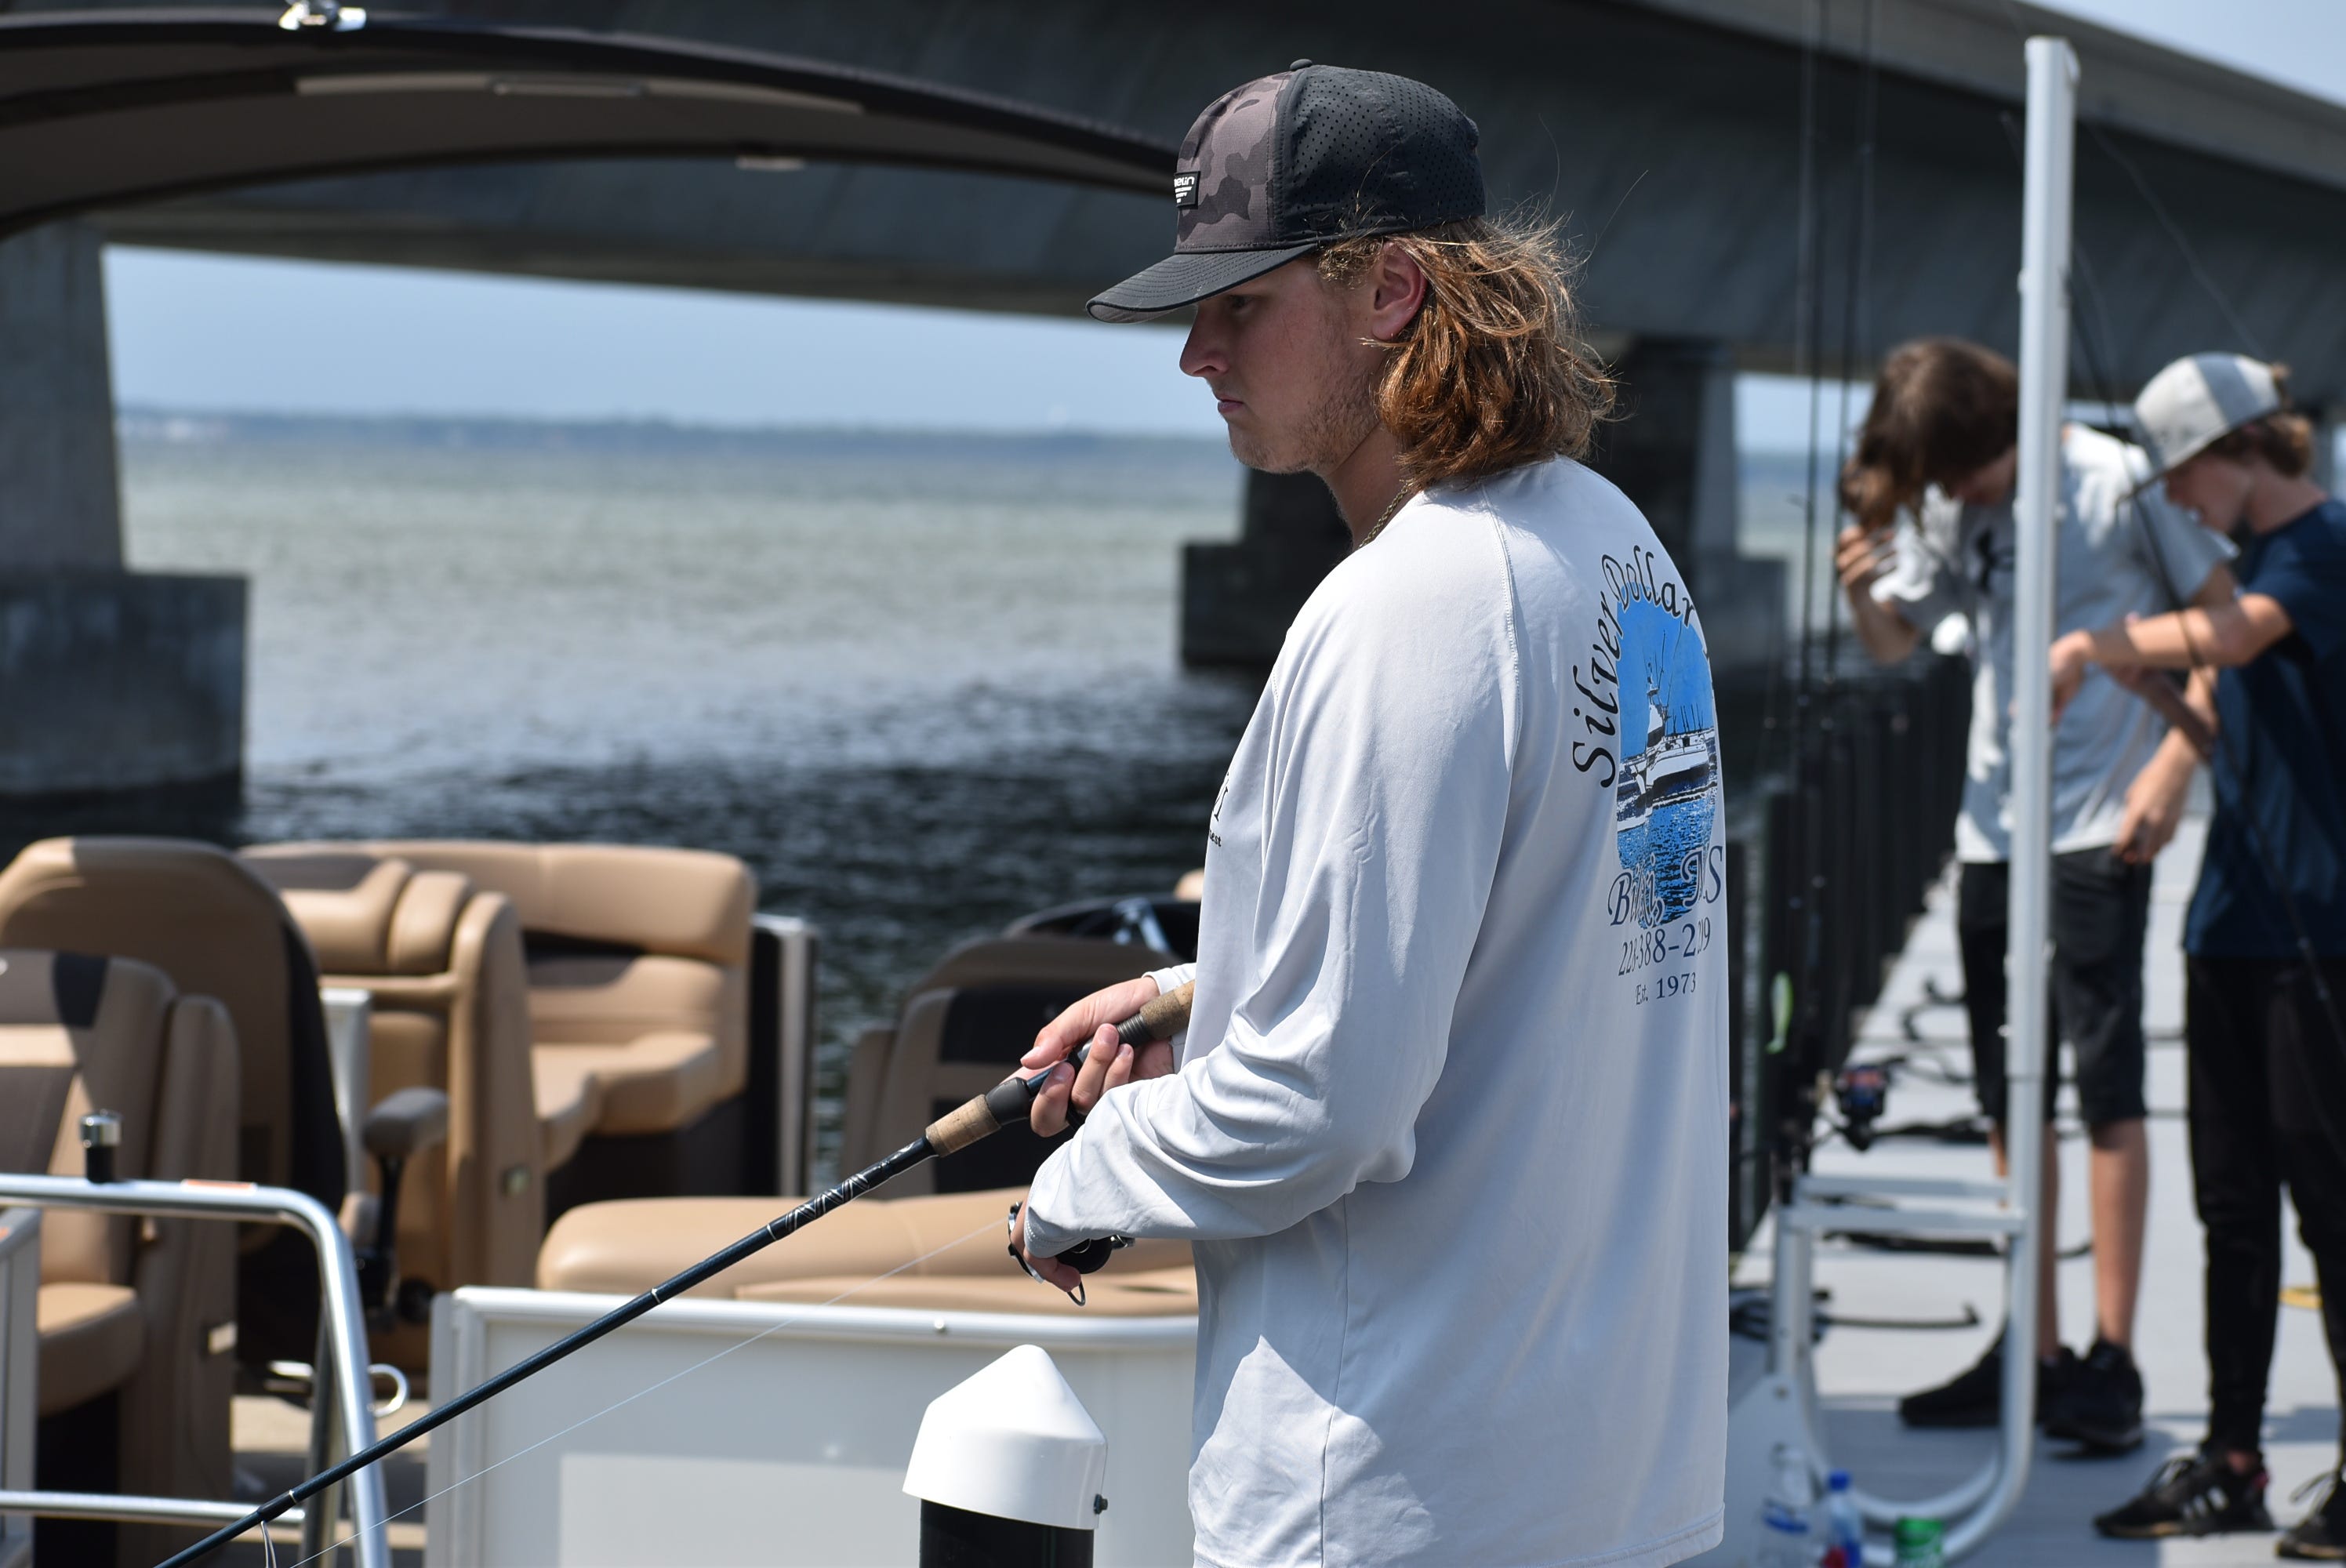 Here's a look at some of the action at the Legendary Marine Destin Fishing Class Bay Tournament on Wednesday afternoon.